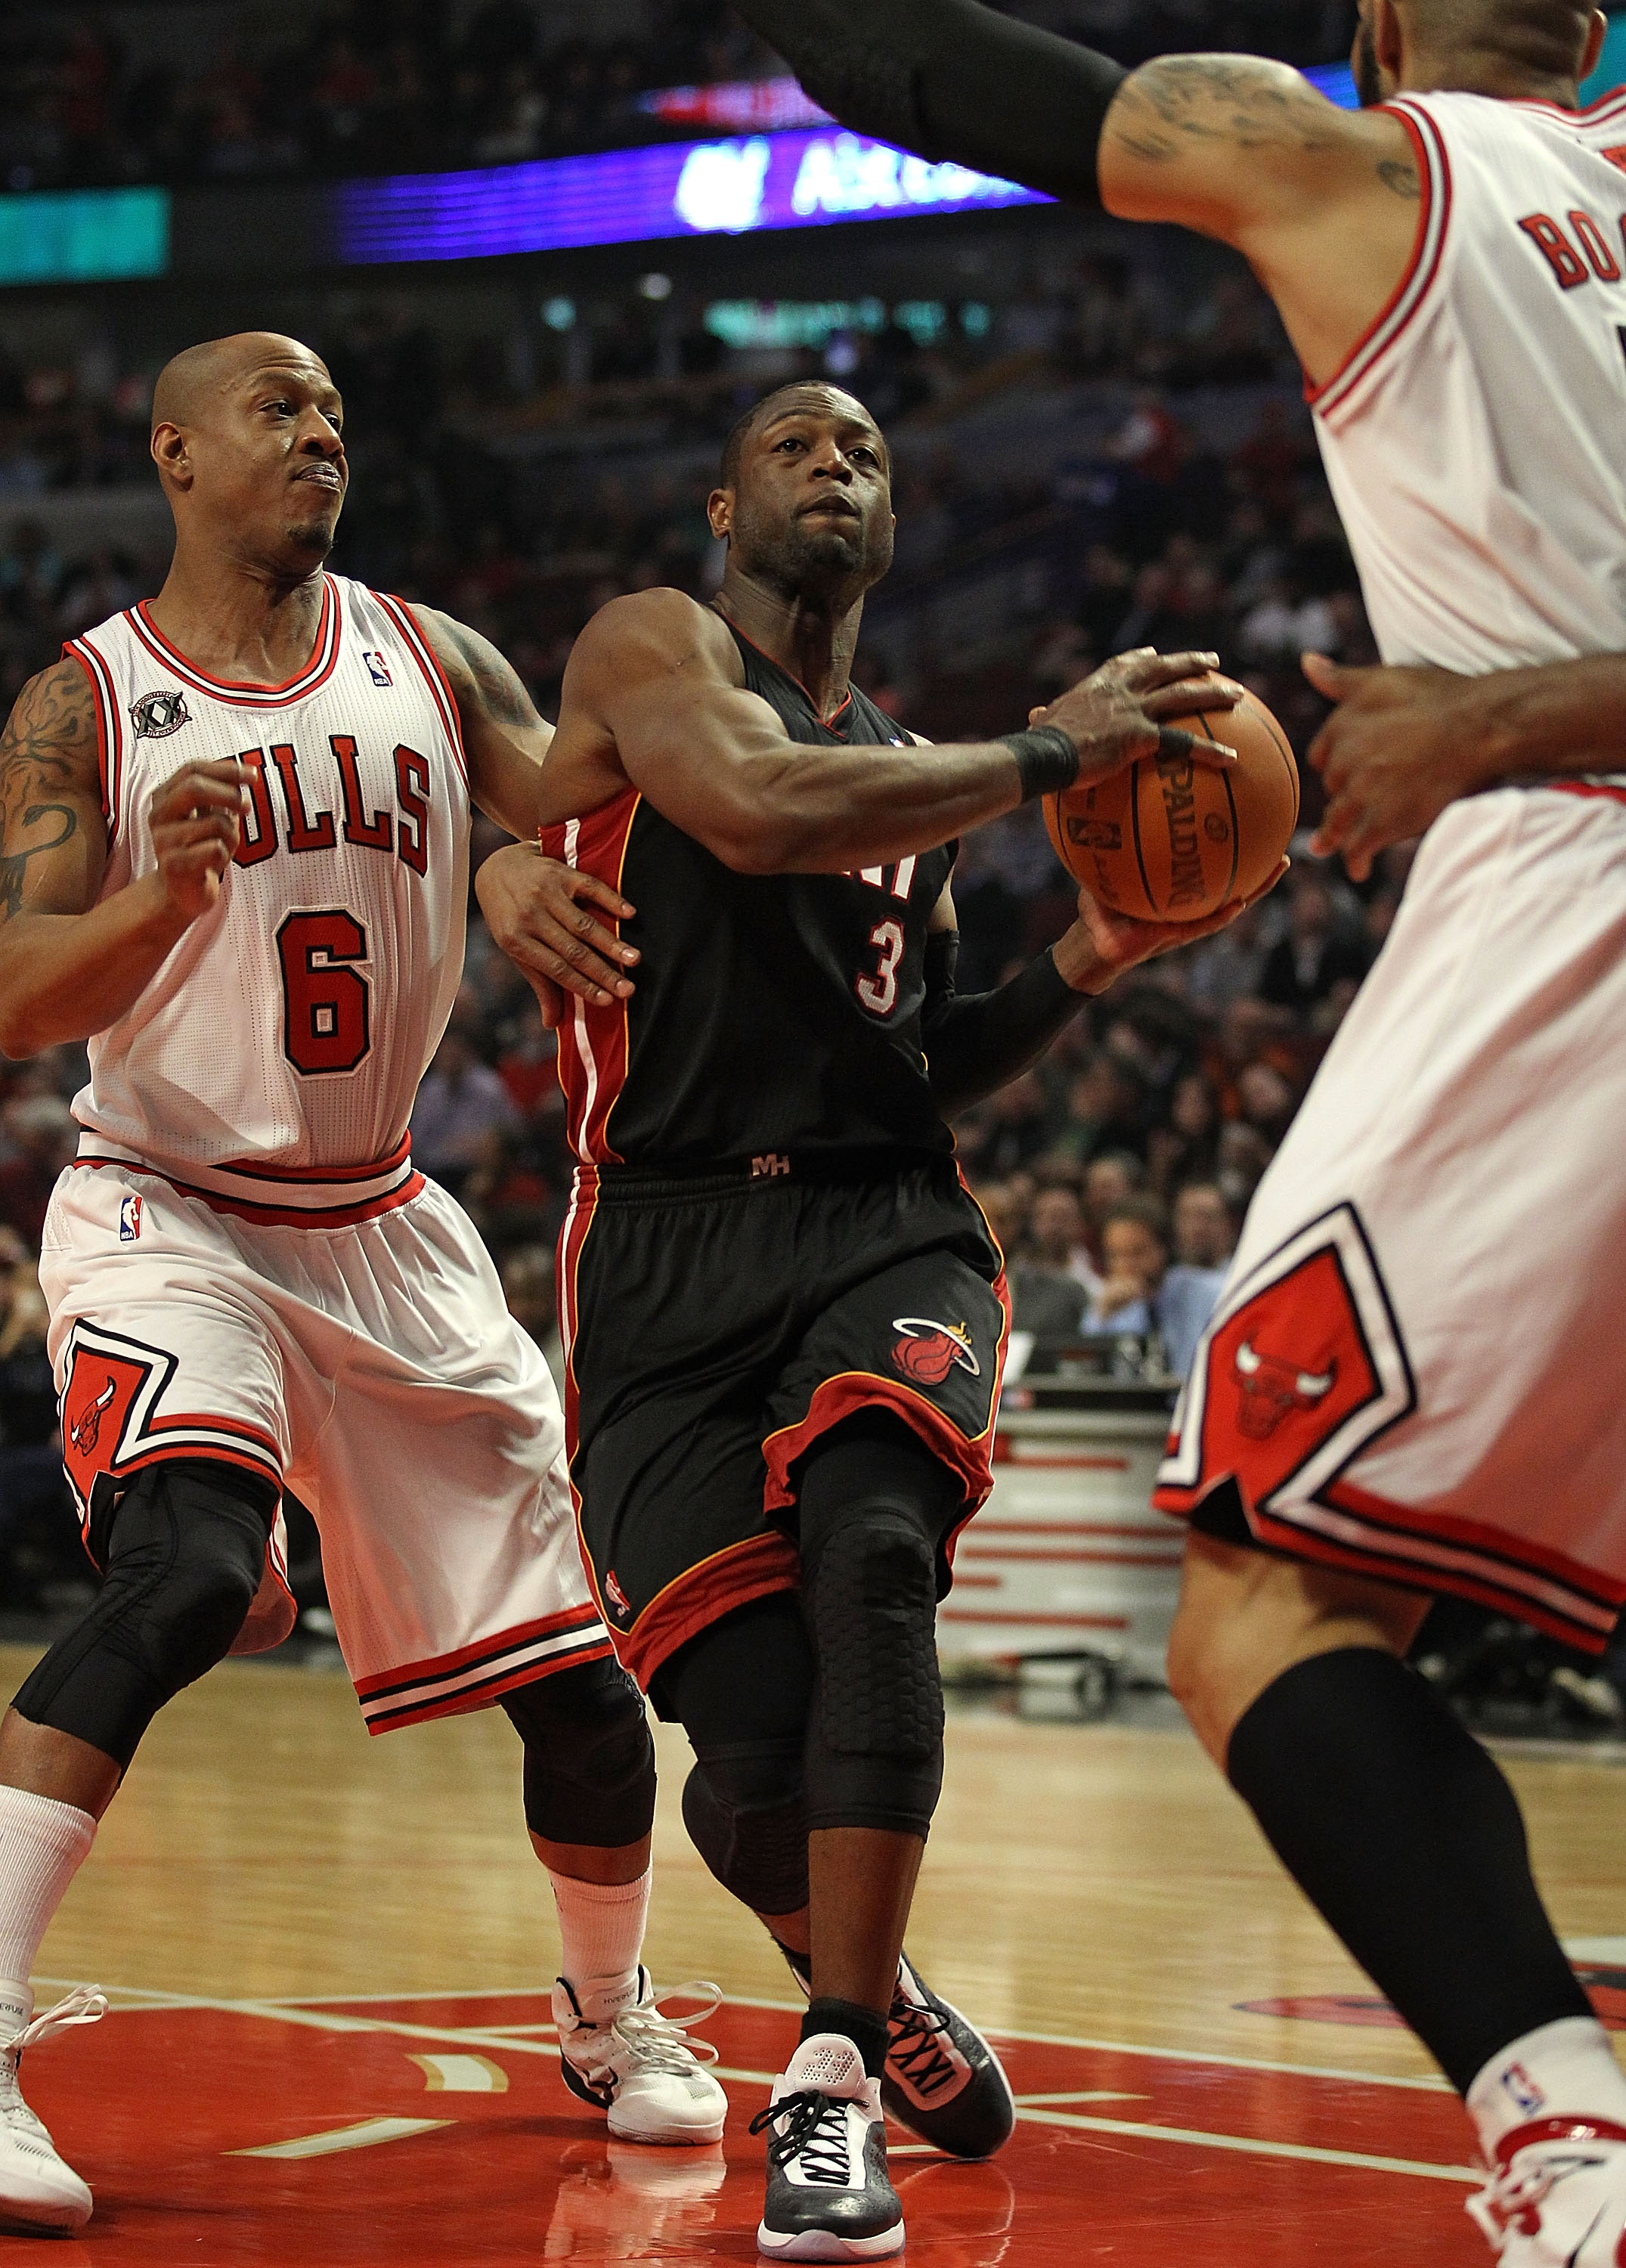 Chicago Bulls guard Derrick Rose (L) shoots over Miami Heat guard Dwyane  Wade during the second quarter of game 1 of the Eastern Conference Finals  at the United Center in Chicago on